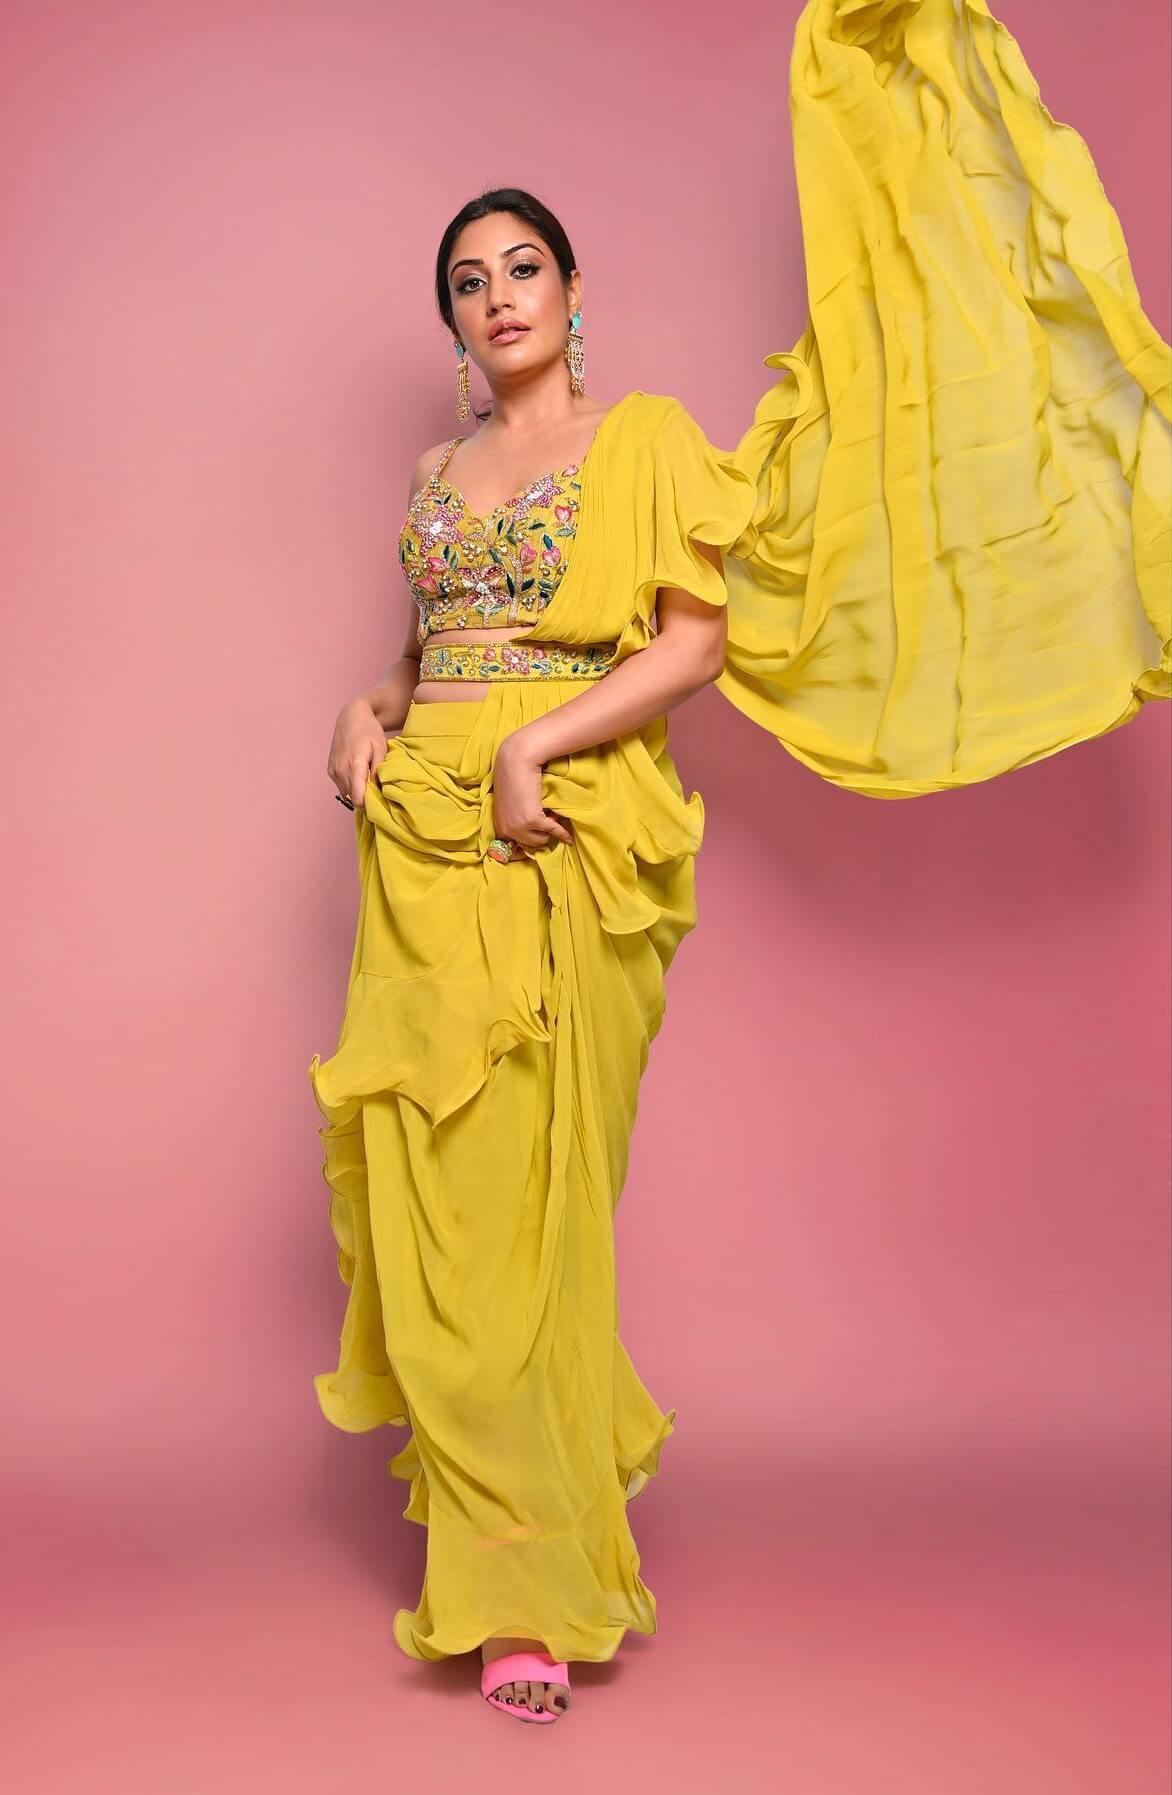  Surbhi Chandna In Gorgeous Yellow Ruffled Saree With Beautifully Embroidered Blouse